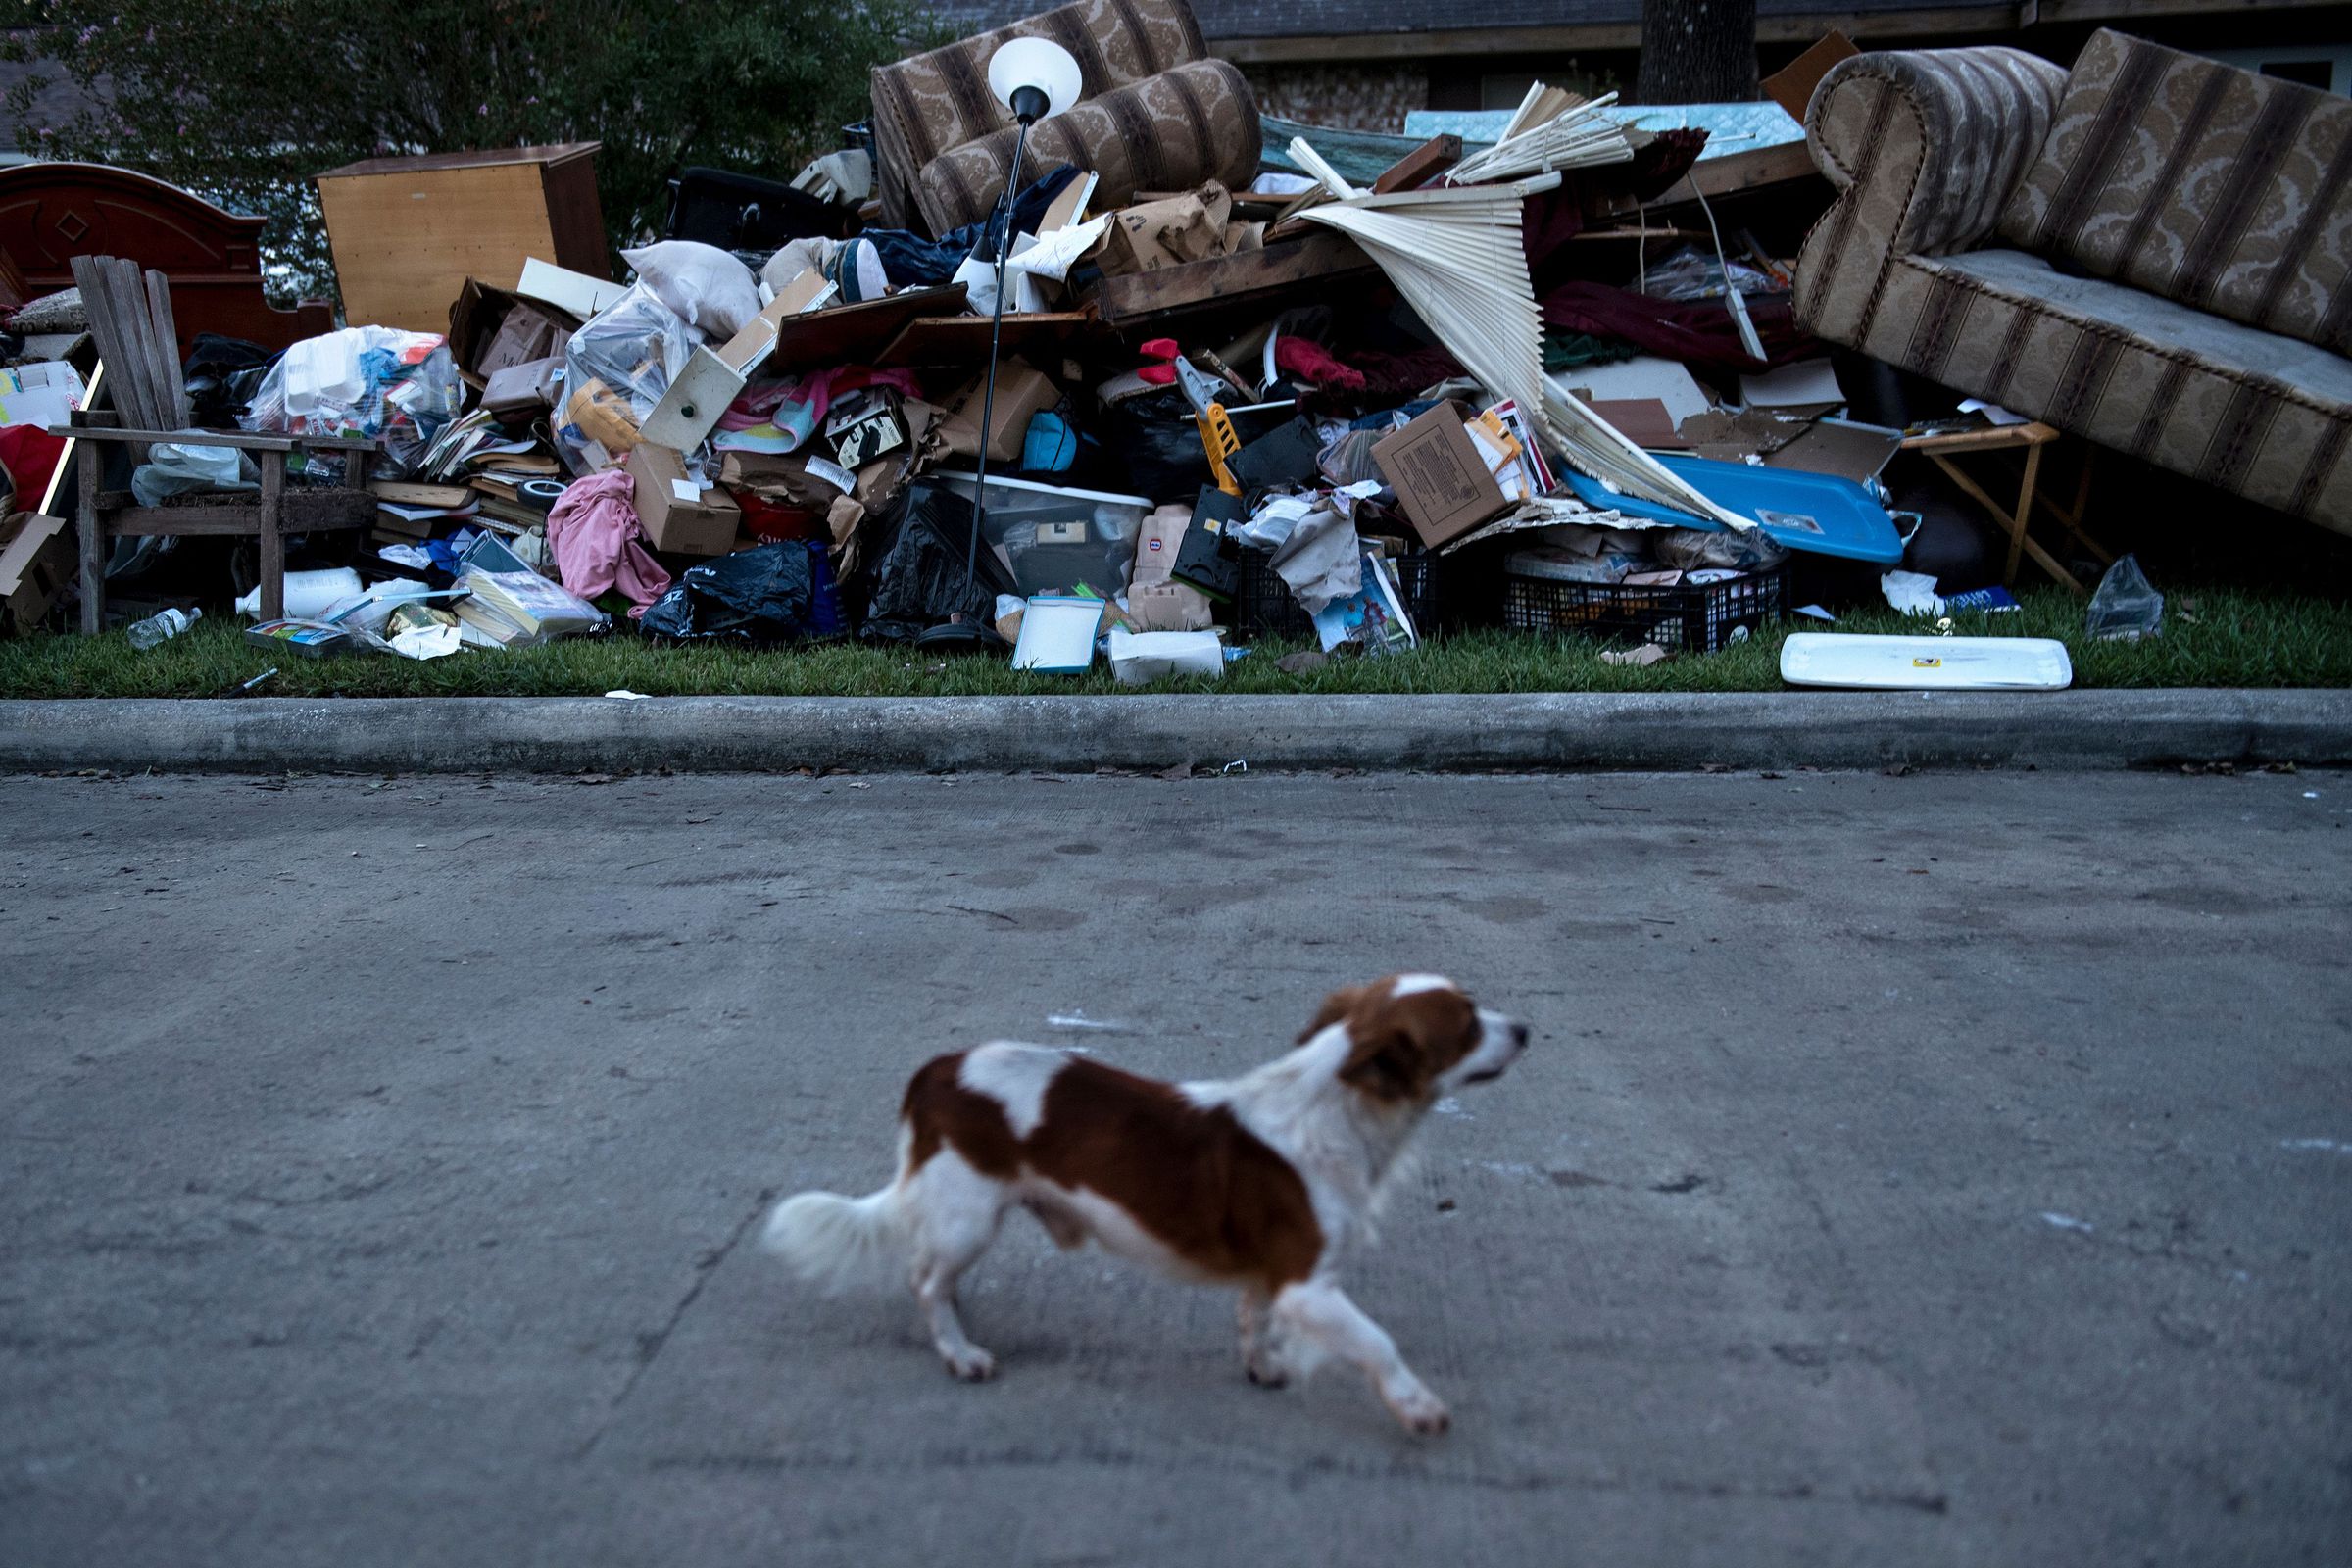 A small dog walks down the street past garbage piled high in front of homes.